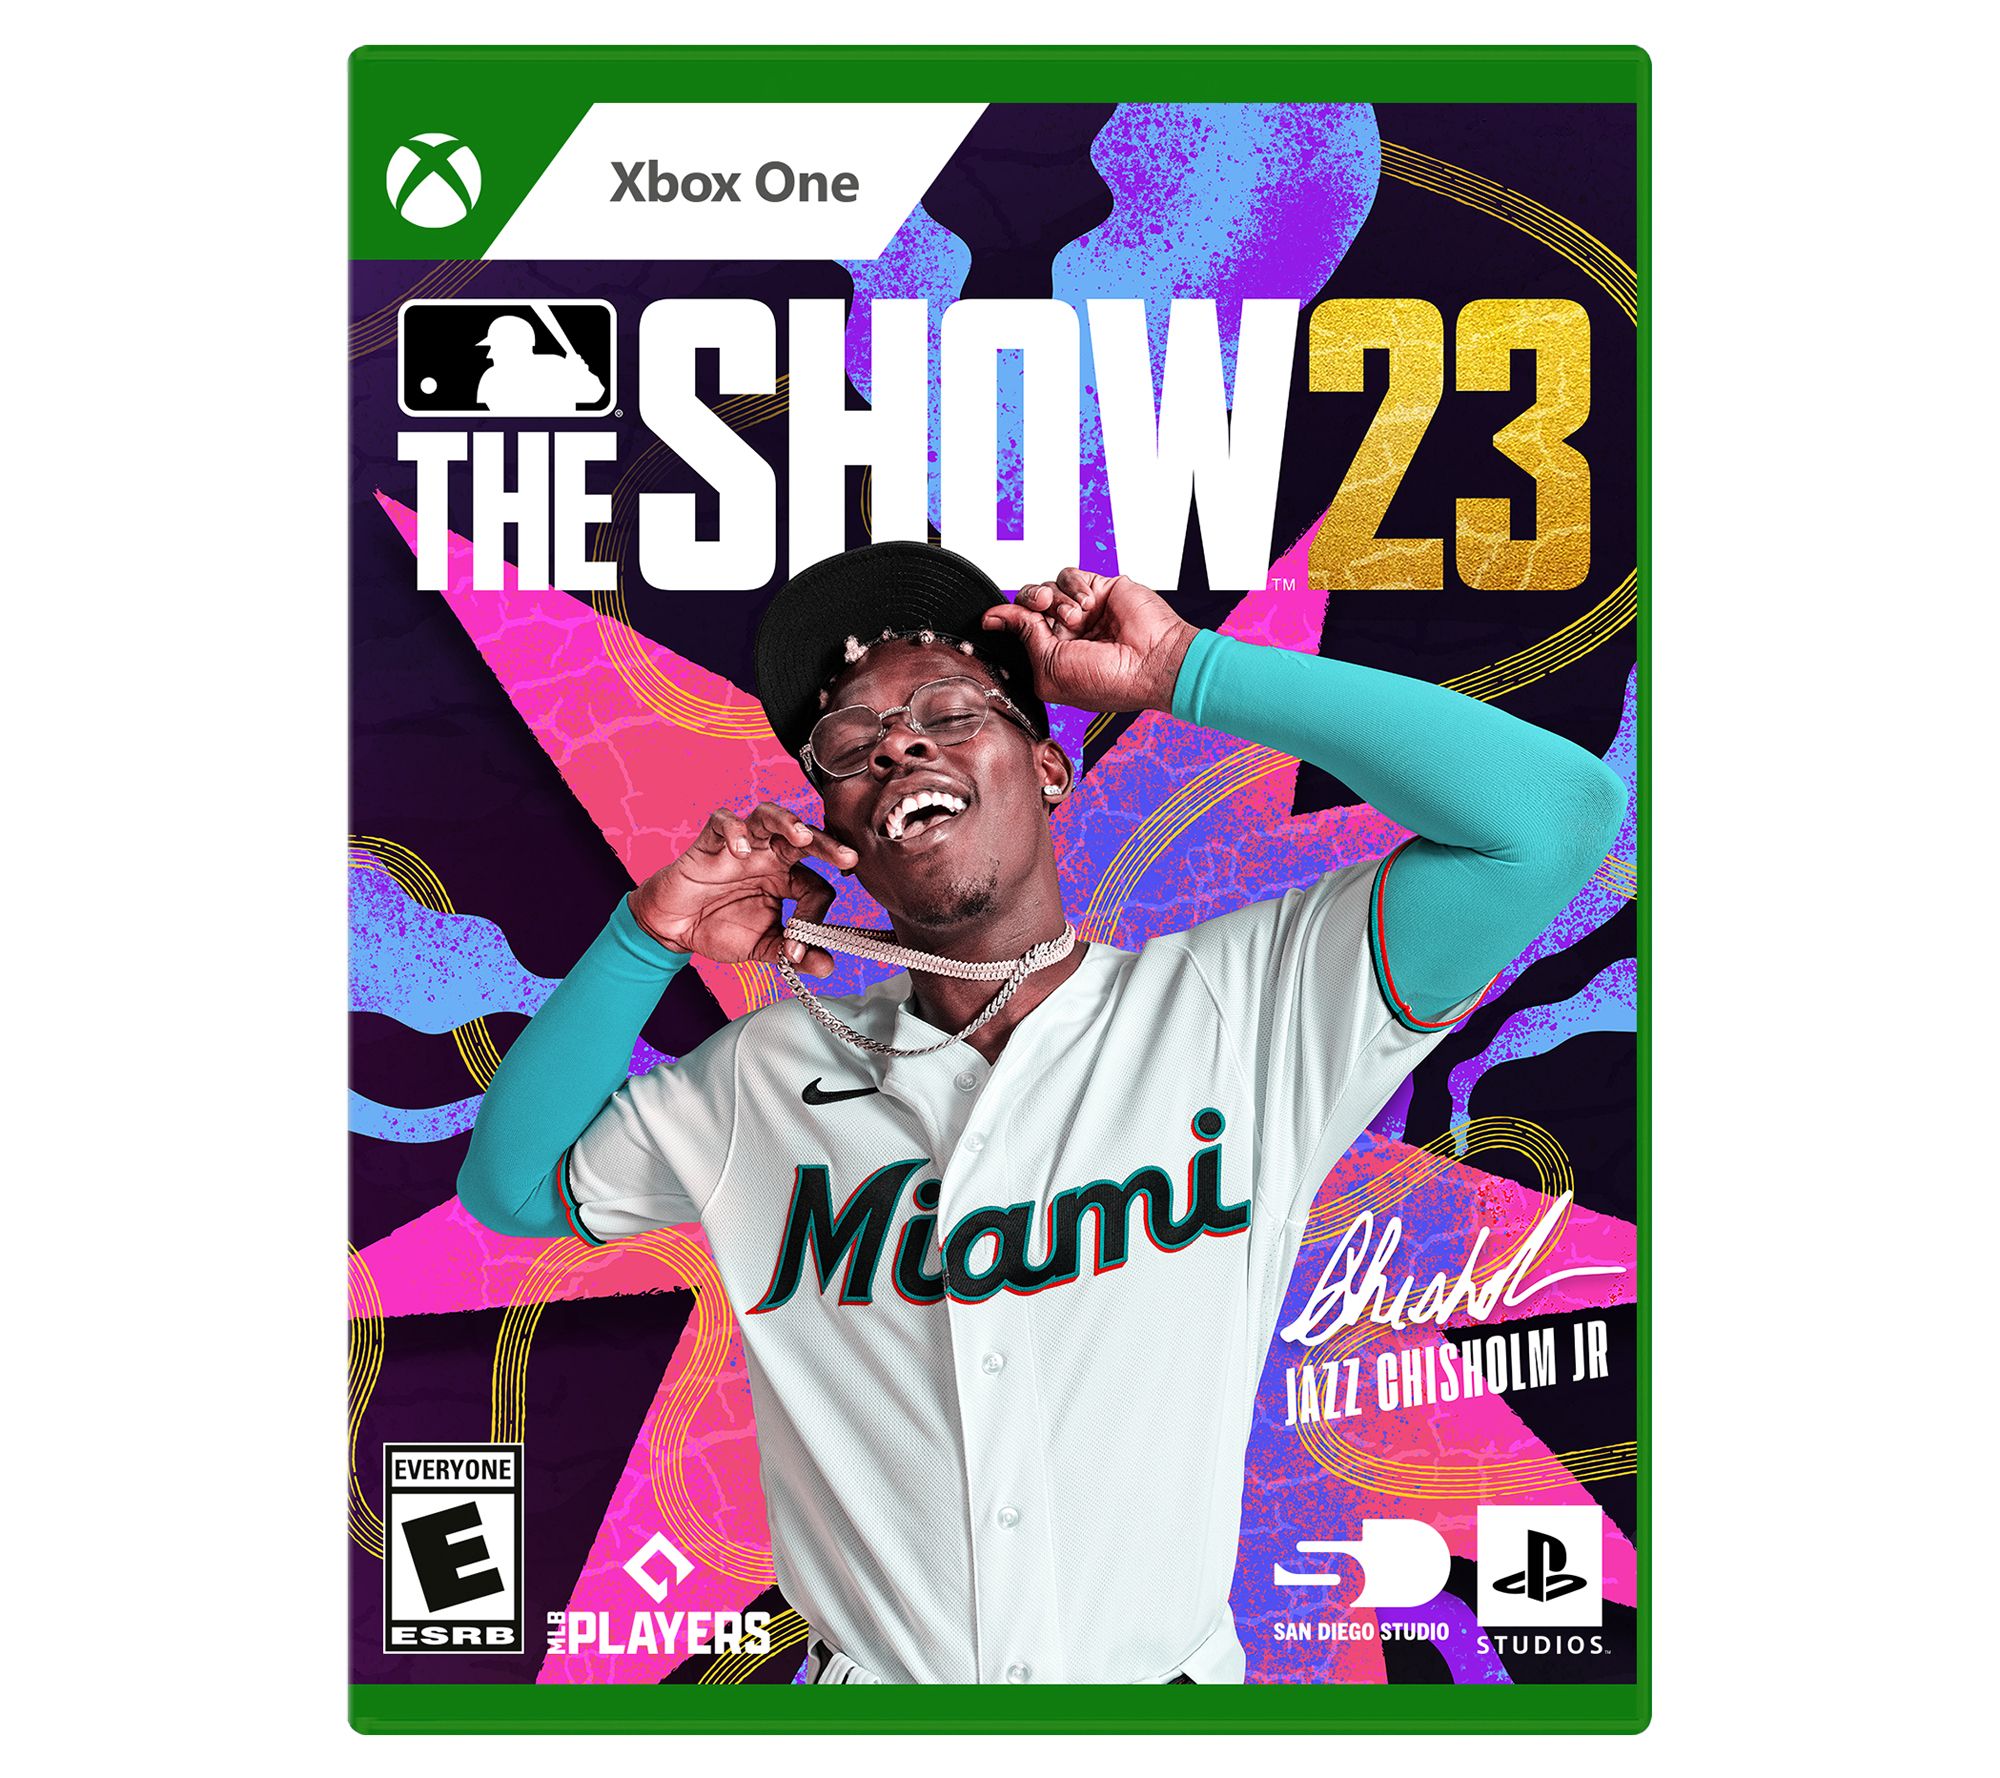 Chisholm Jr. brings 'electric personality' to MLB The Show 23